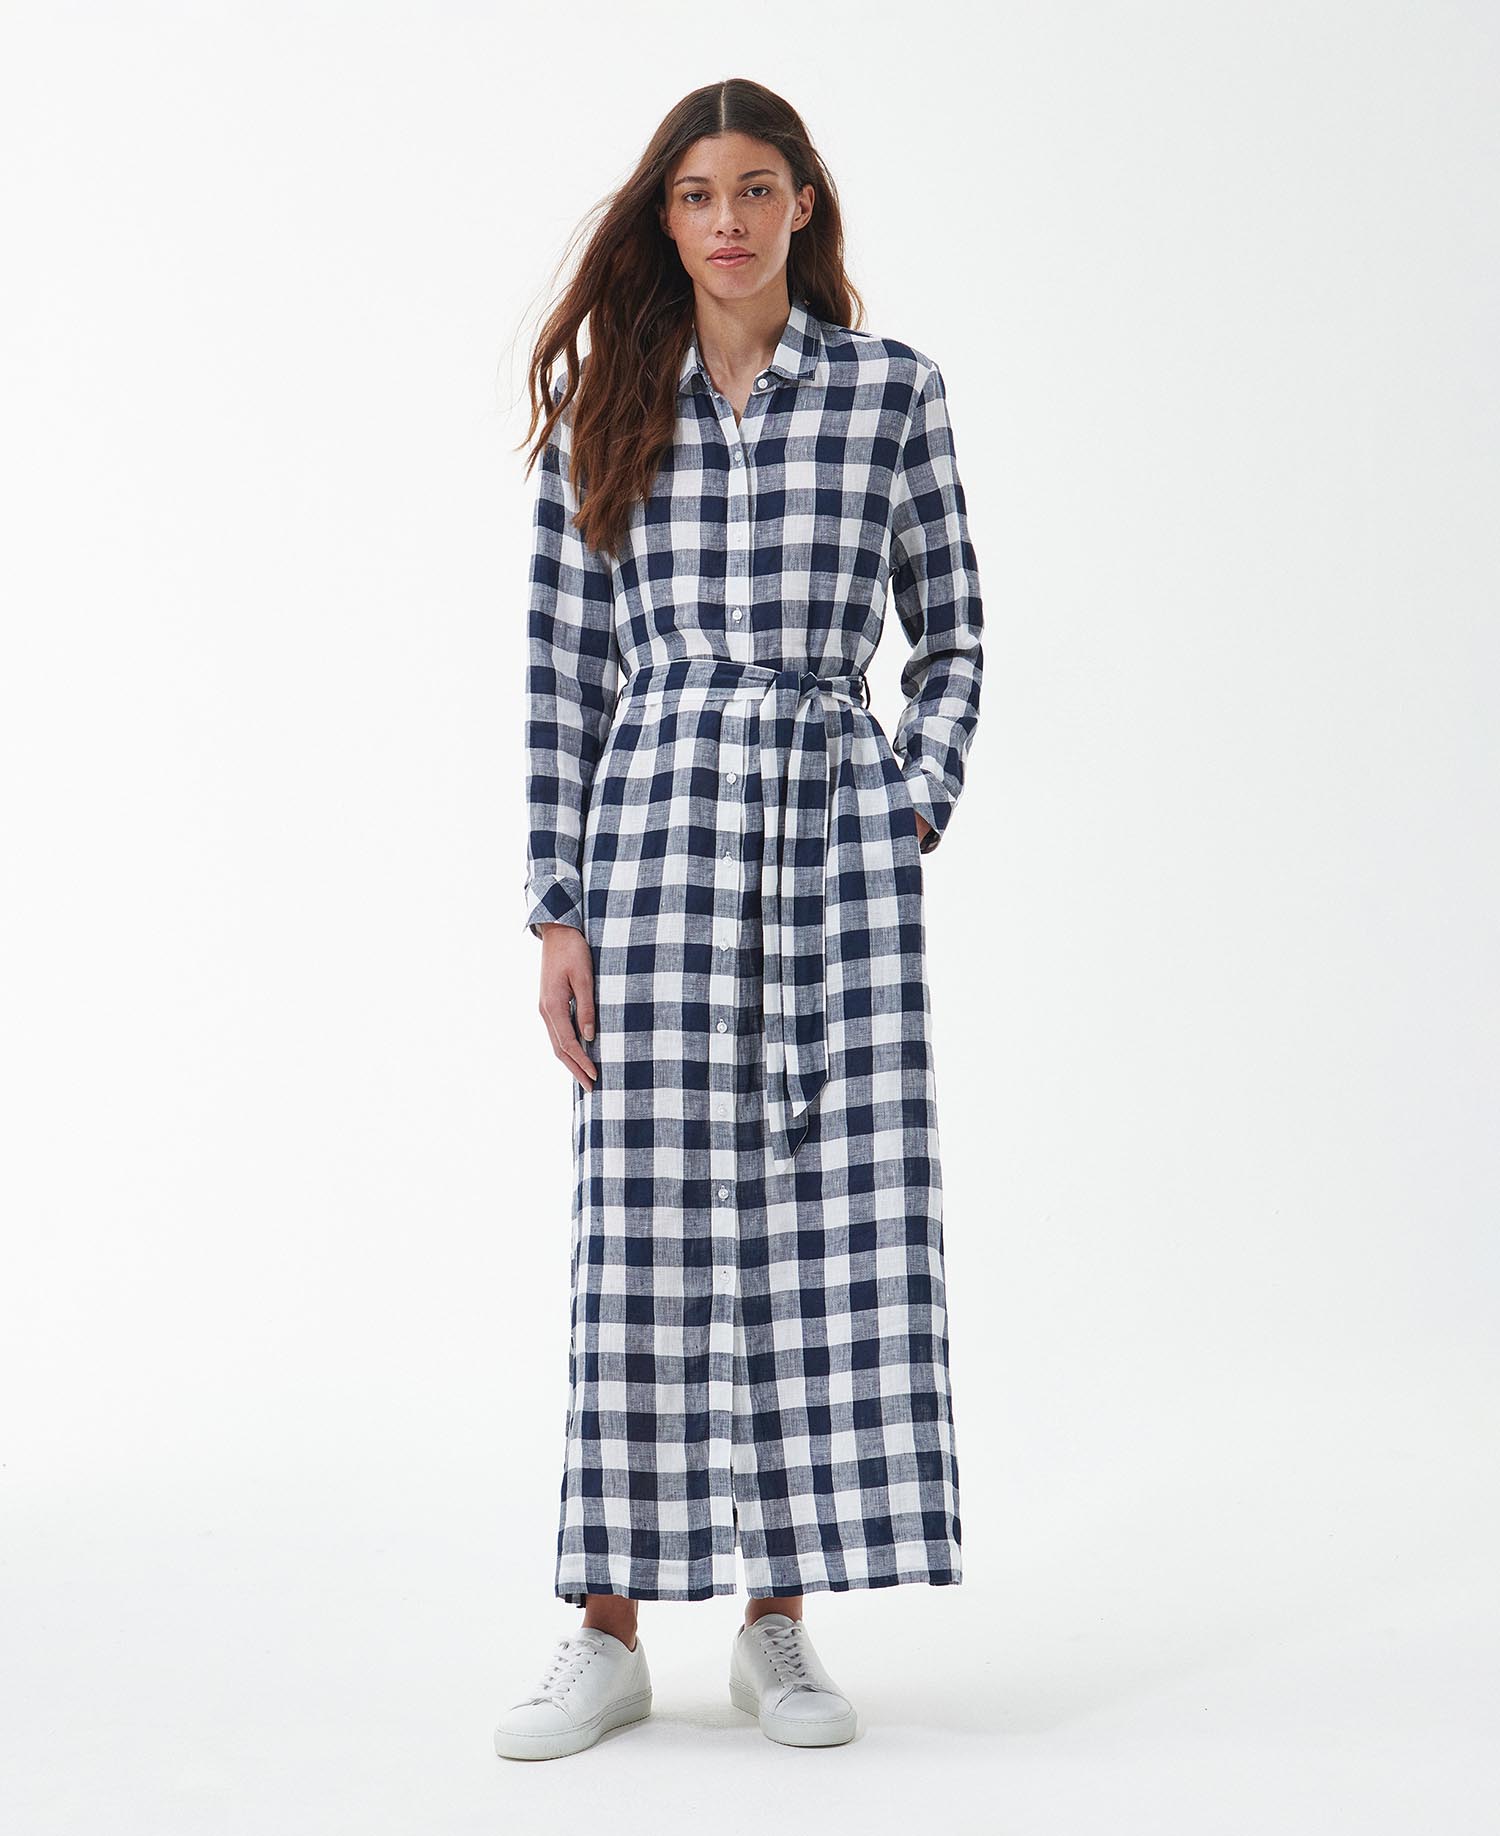 Barbour Women's Marine Checked Maxi Dress